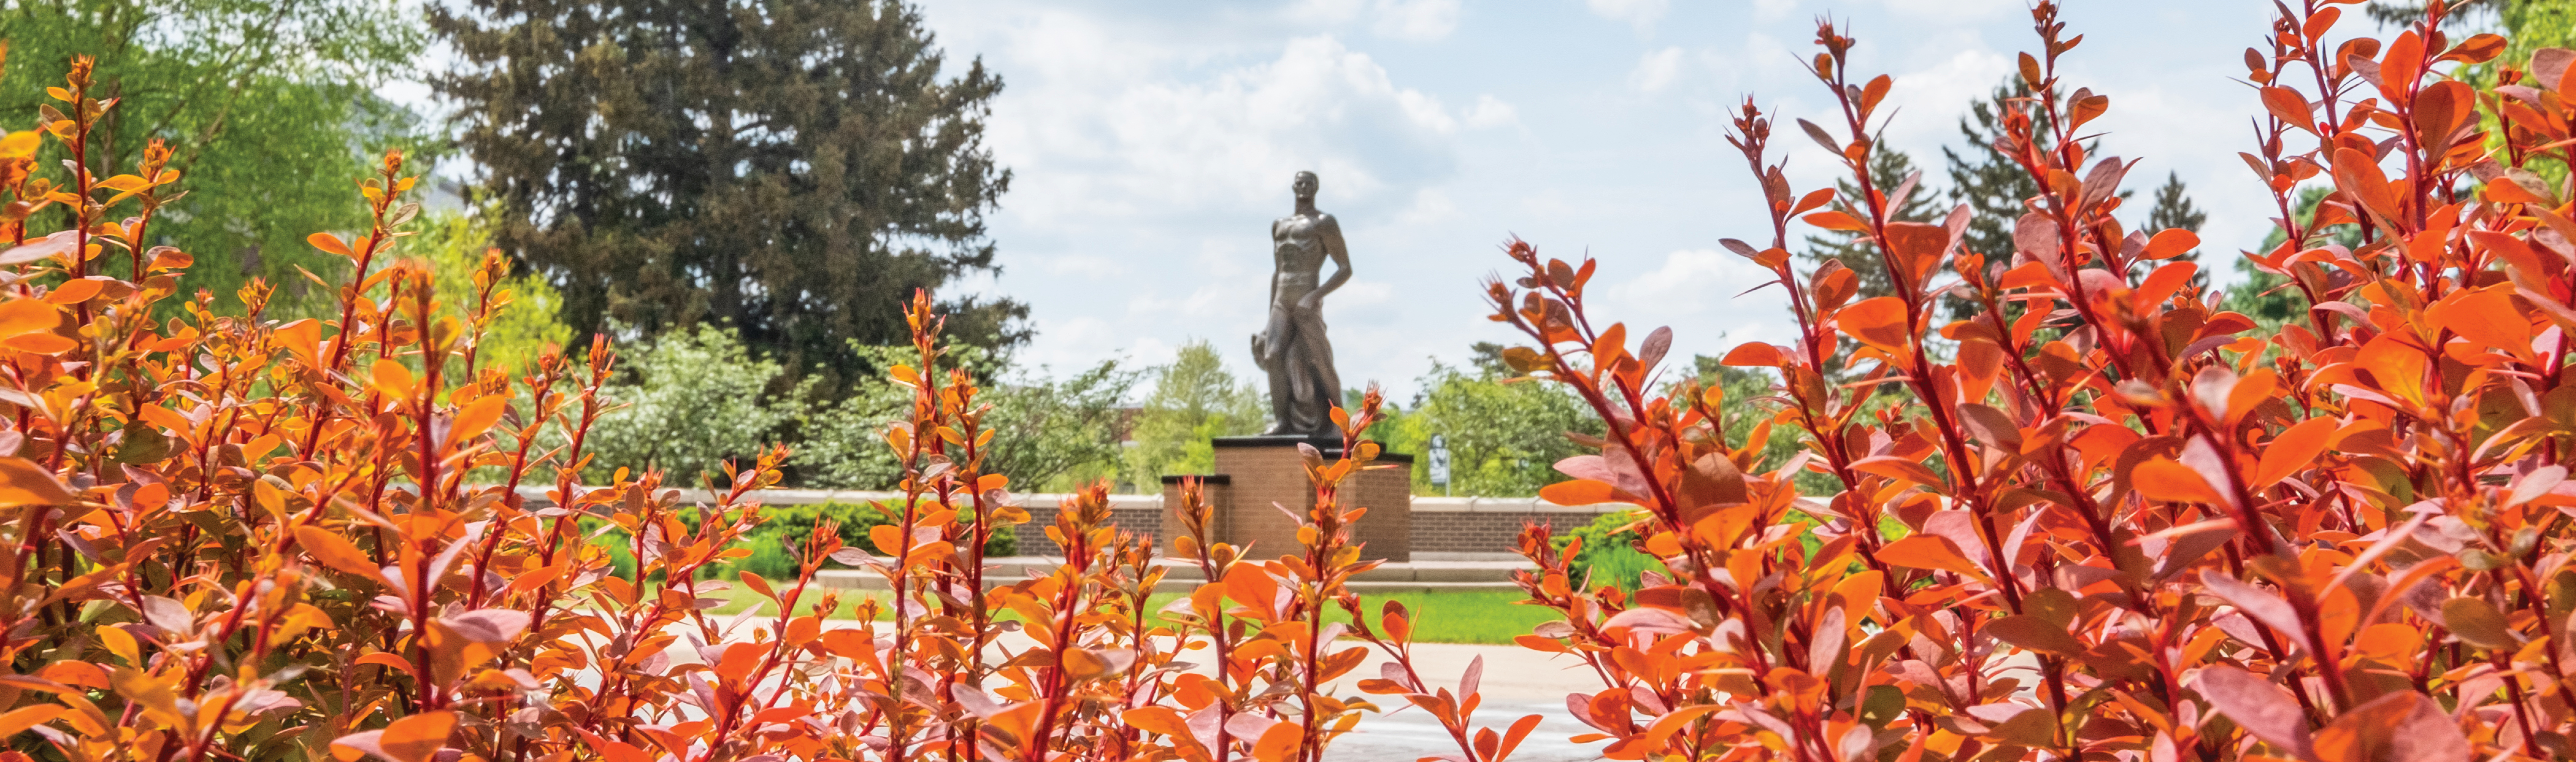 sparty statue in summer